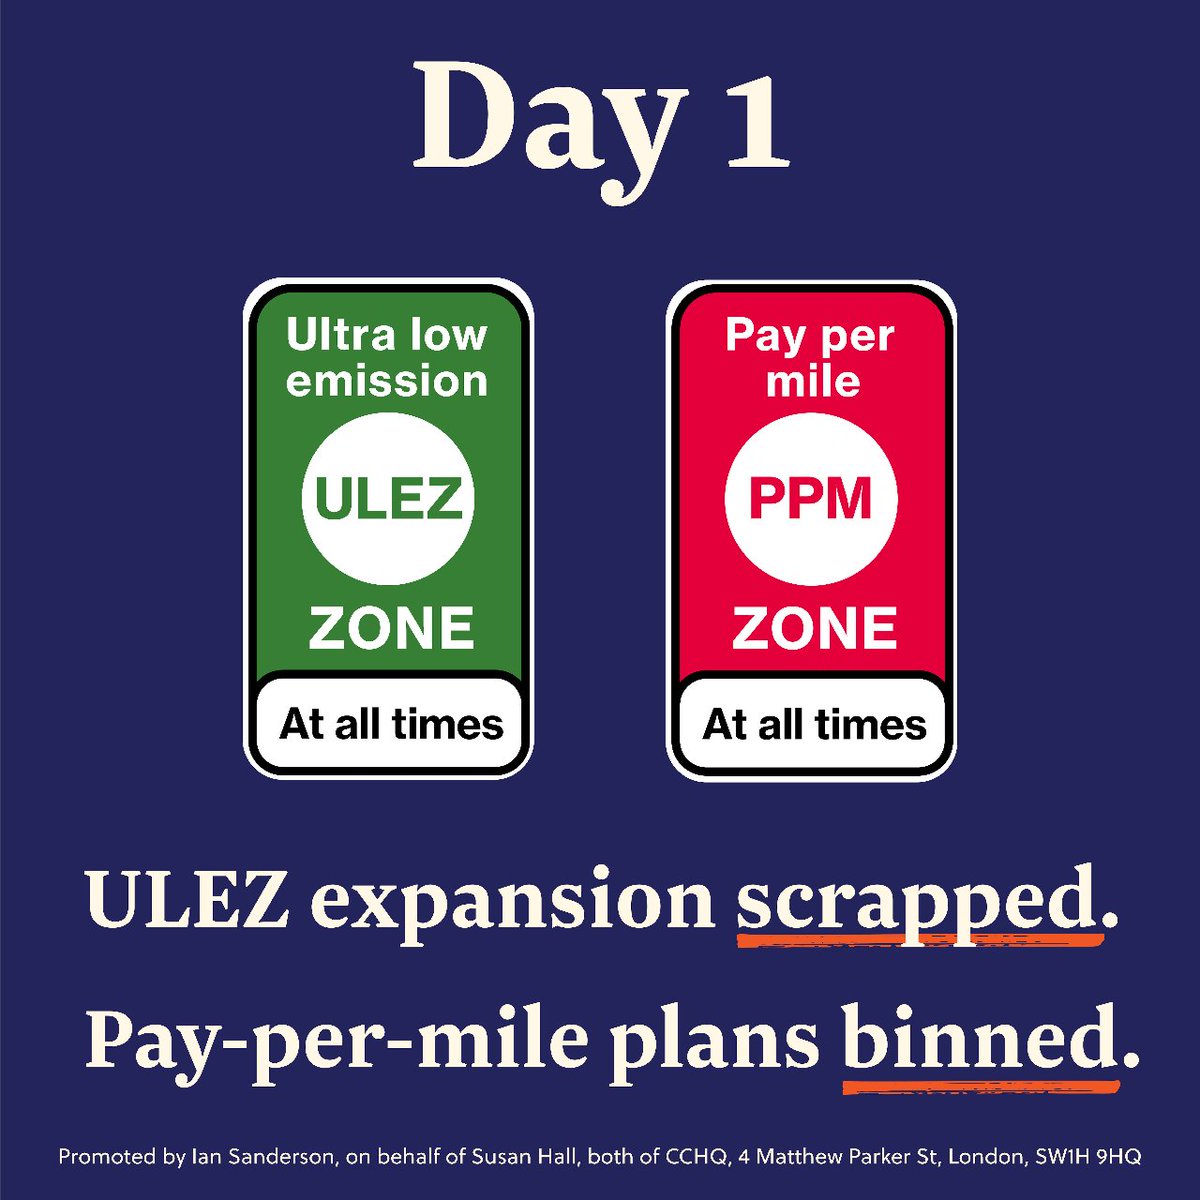 Sadiq Khan has made London more expensive for small businesses, charities and those least able to pay. He simply doesn’t listen. I’ll be different. That’s why I’ll scrap his ULEZ expansion on Day 1 and put his pay-per-mile plans in the bin.